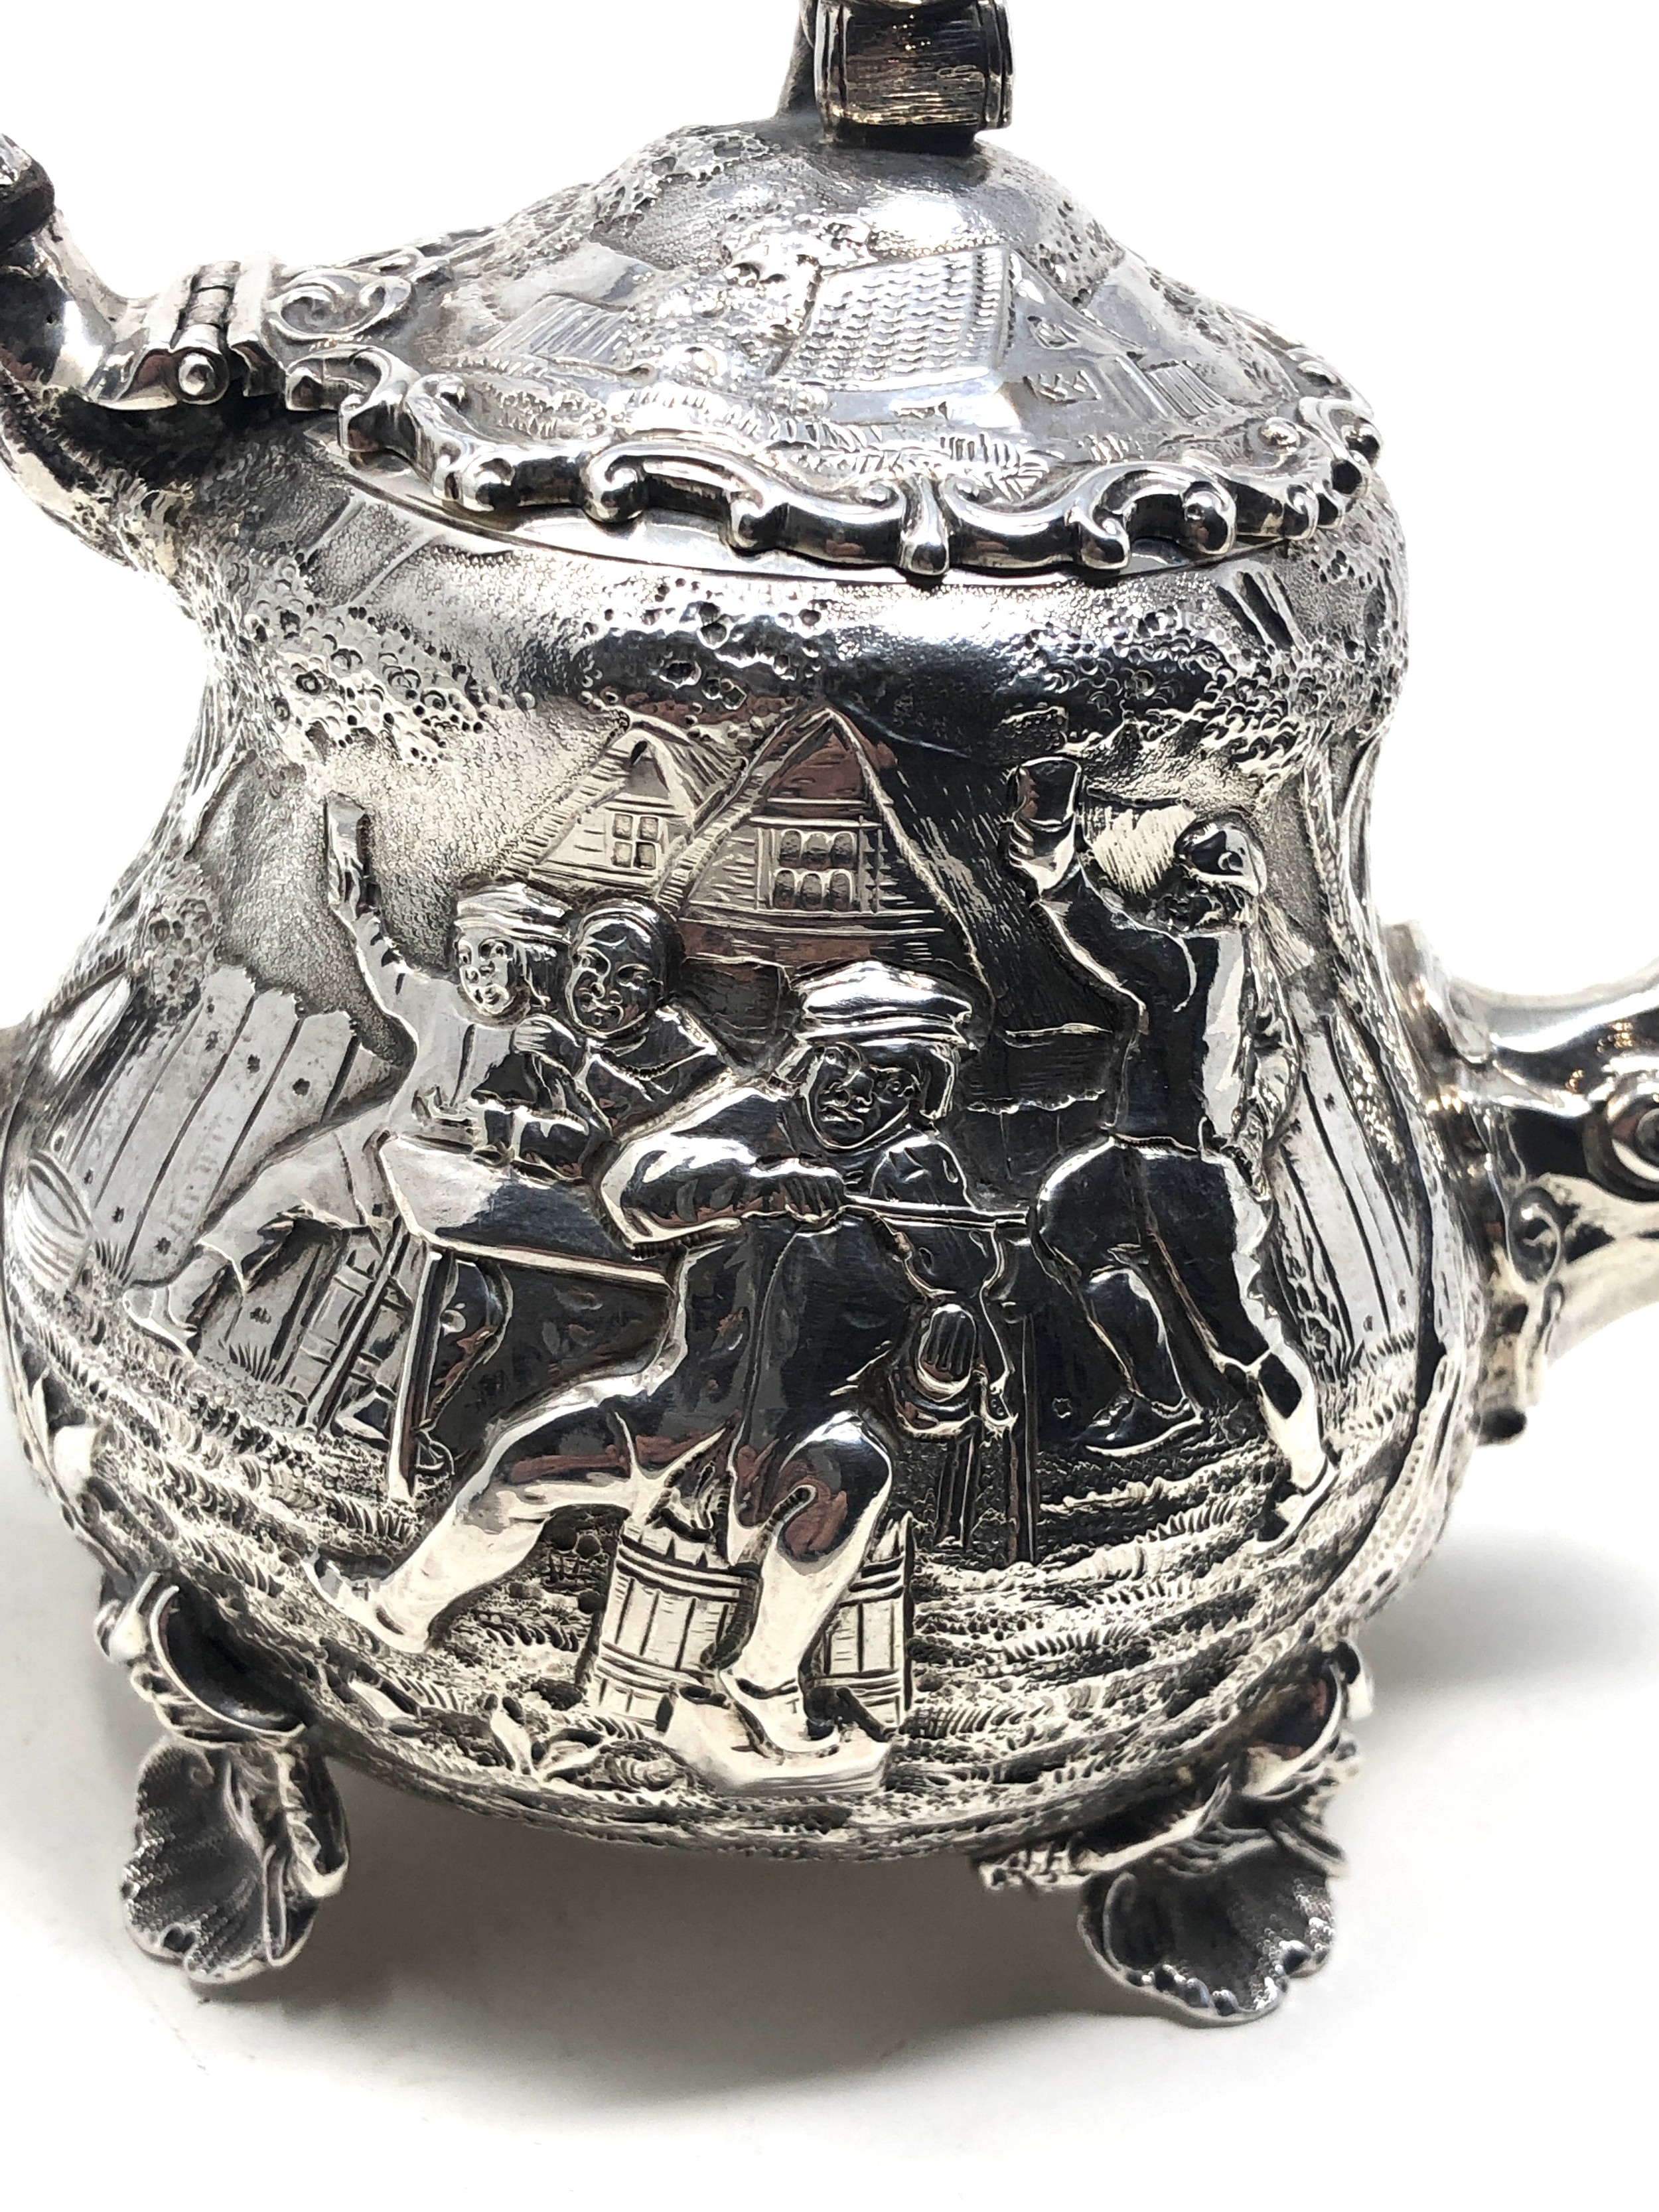 Fine Antique Victorian silver bachelor teapot either side with scenes after "Tennier" London - Image 6 of 8